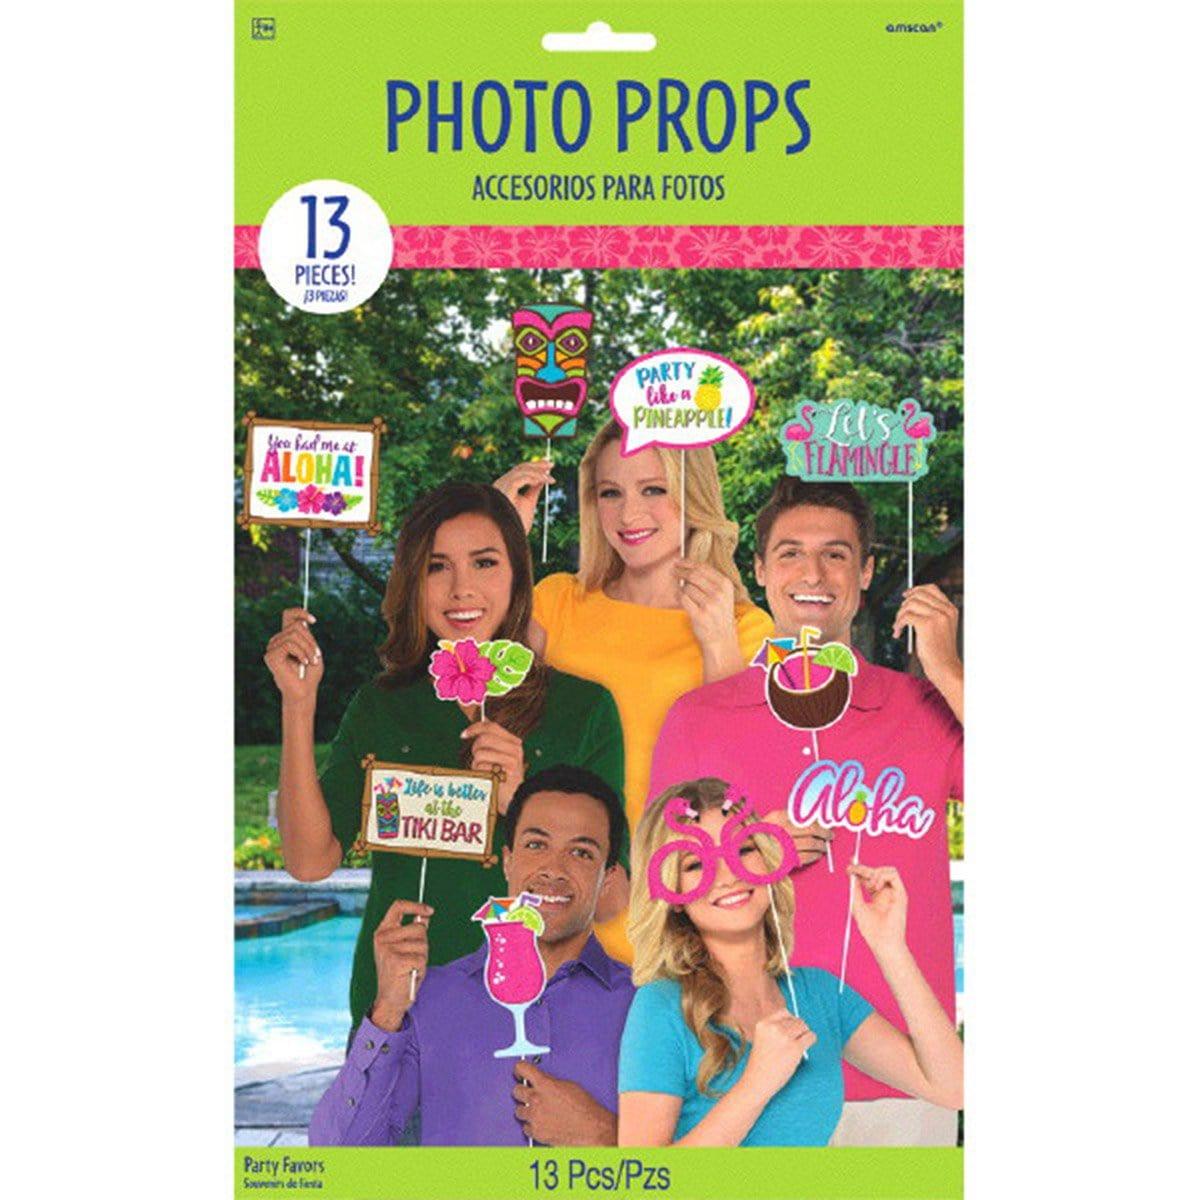 Buy Theme Party Tiki Photo Booth Props, 13 per Package sold at Party Expert